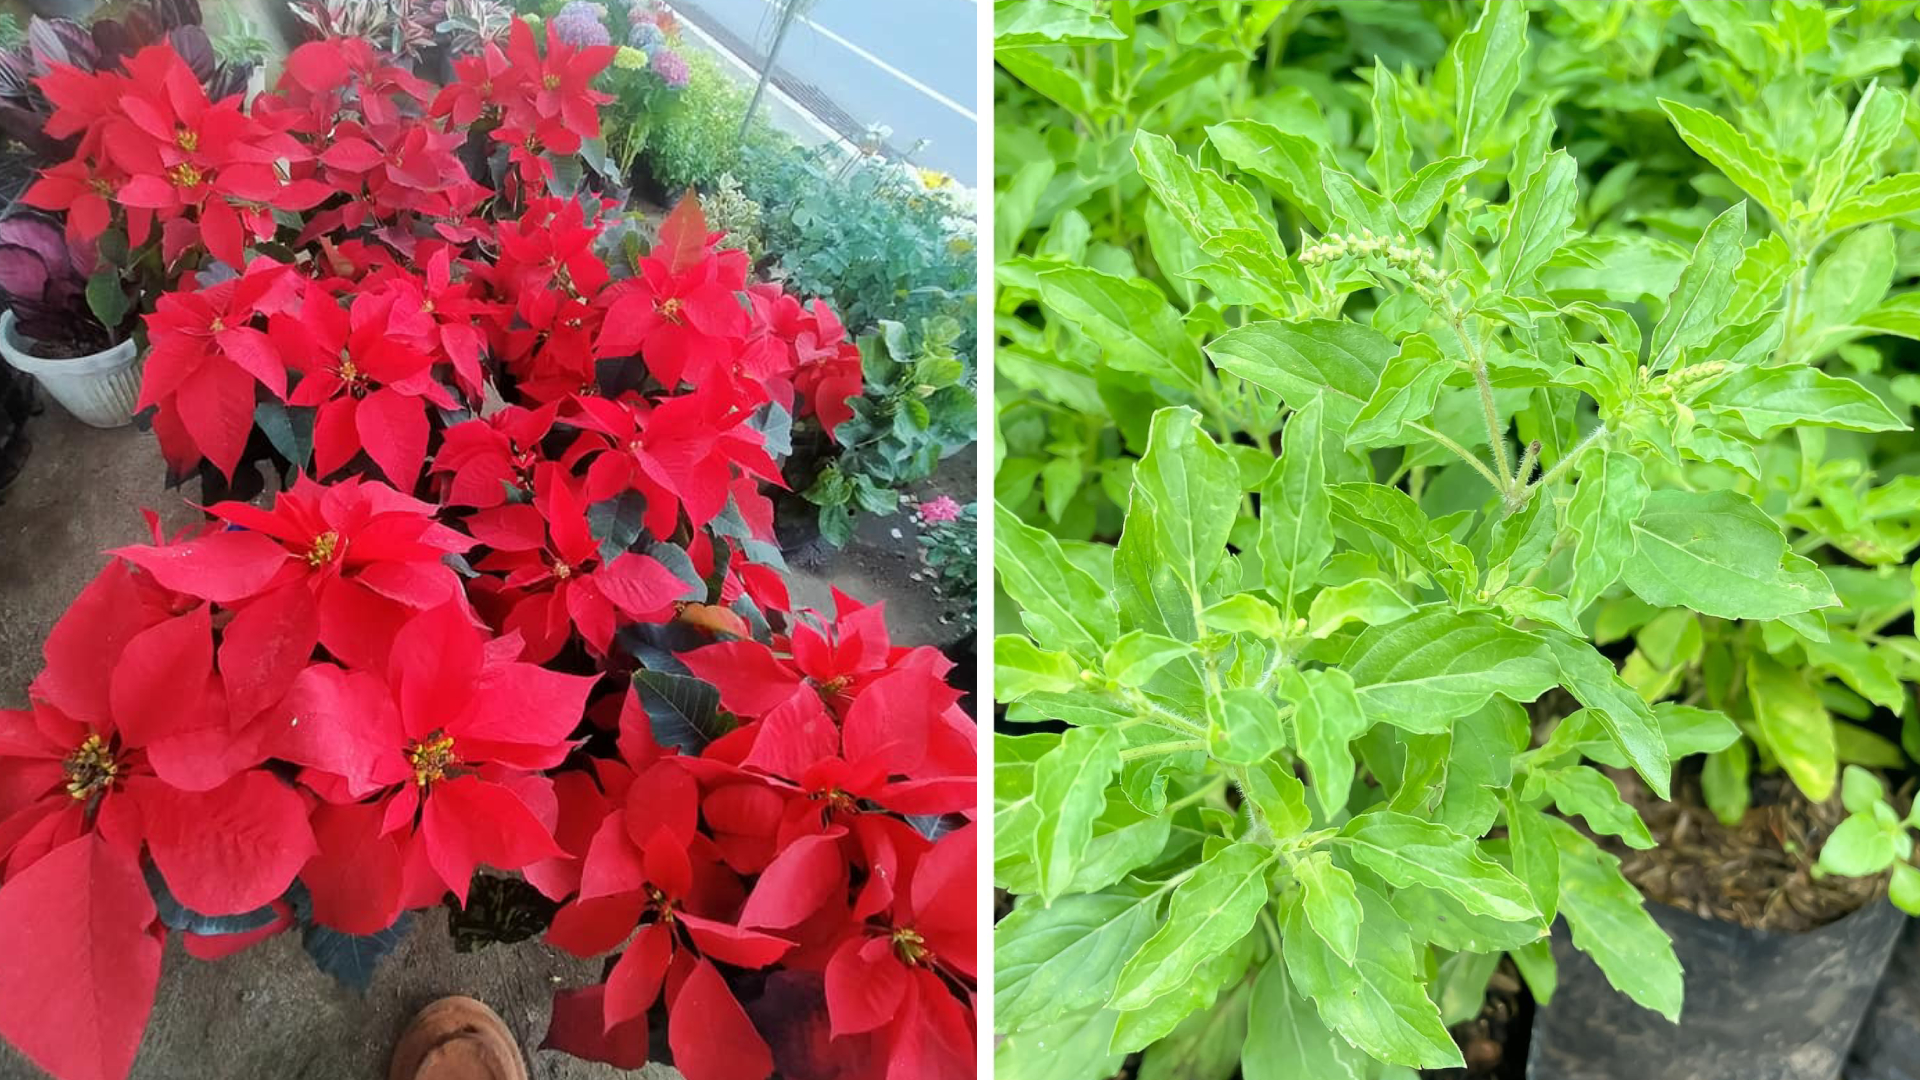 Plant Shopping in Silang - Poinsettias and holy basil herbs